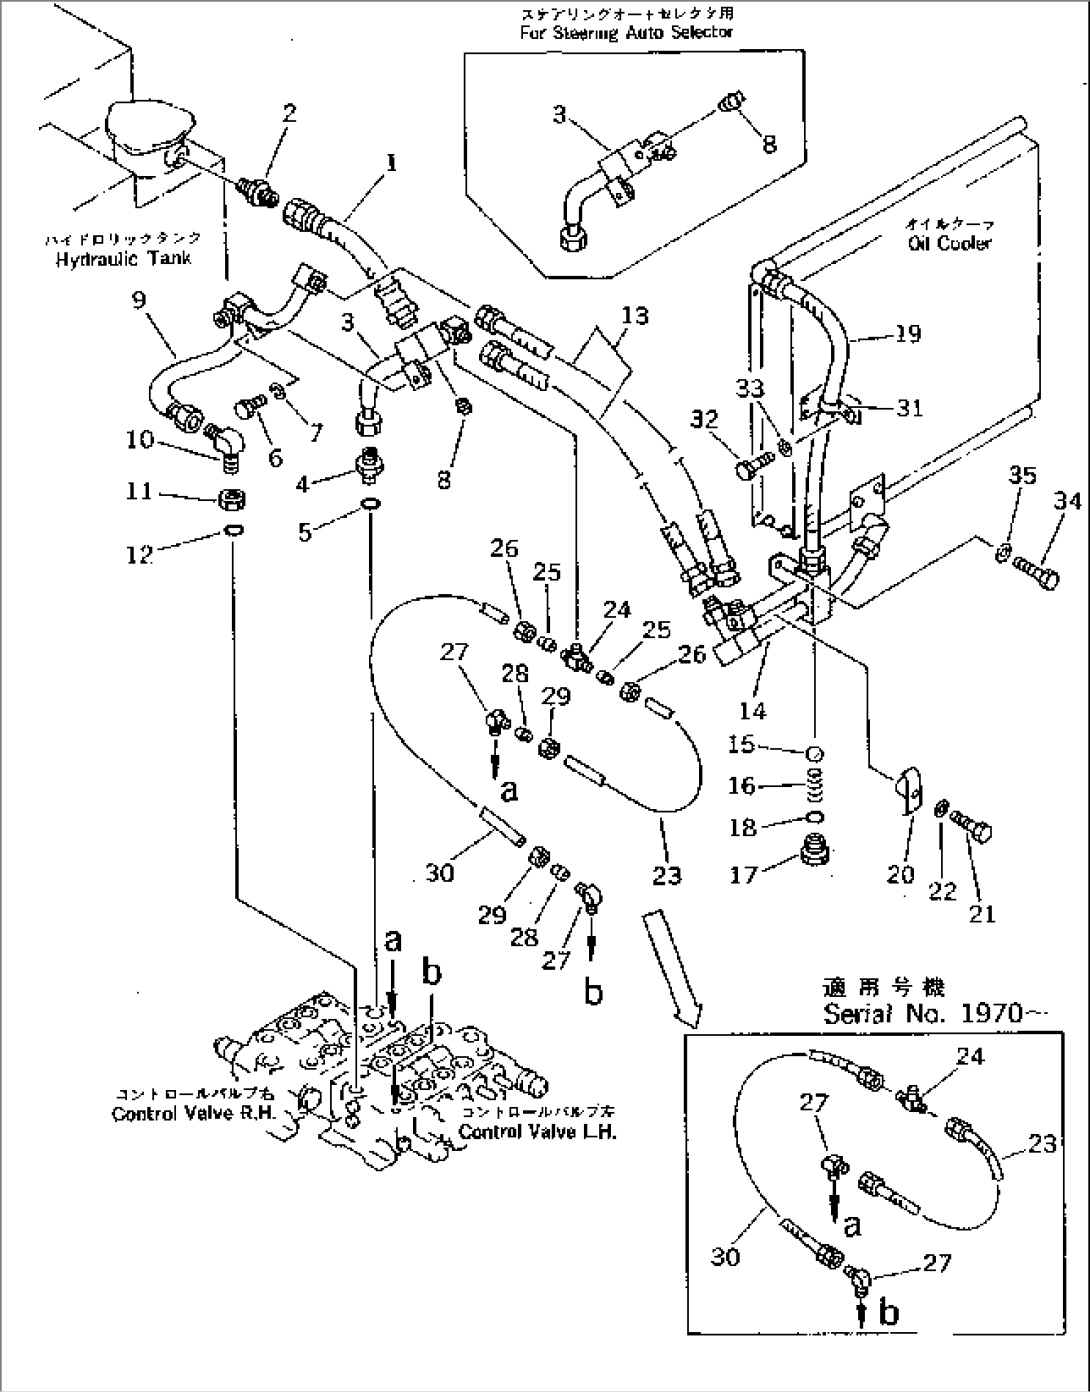 HYDRAULIC PIPING (VALVE TO OIL COOLER TO TANK) (WITH OLSS)(#1862-)